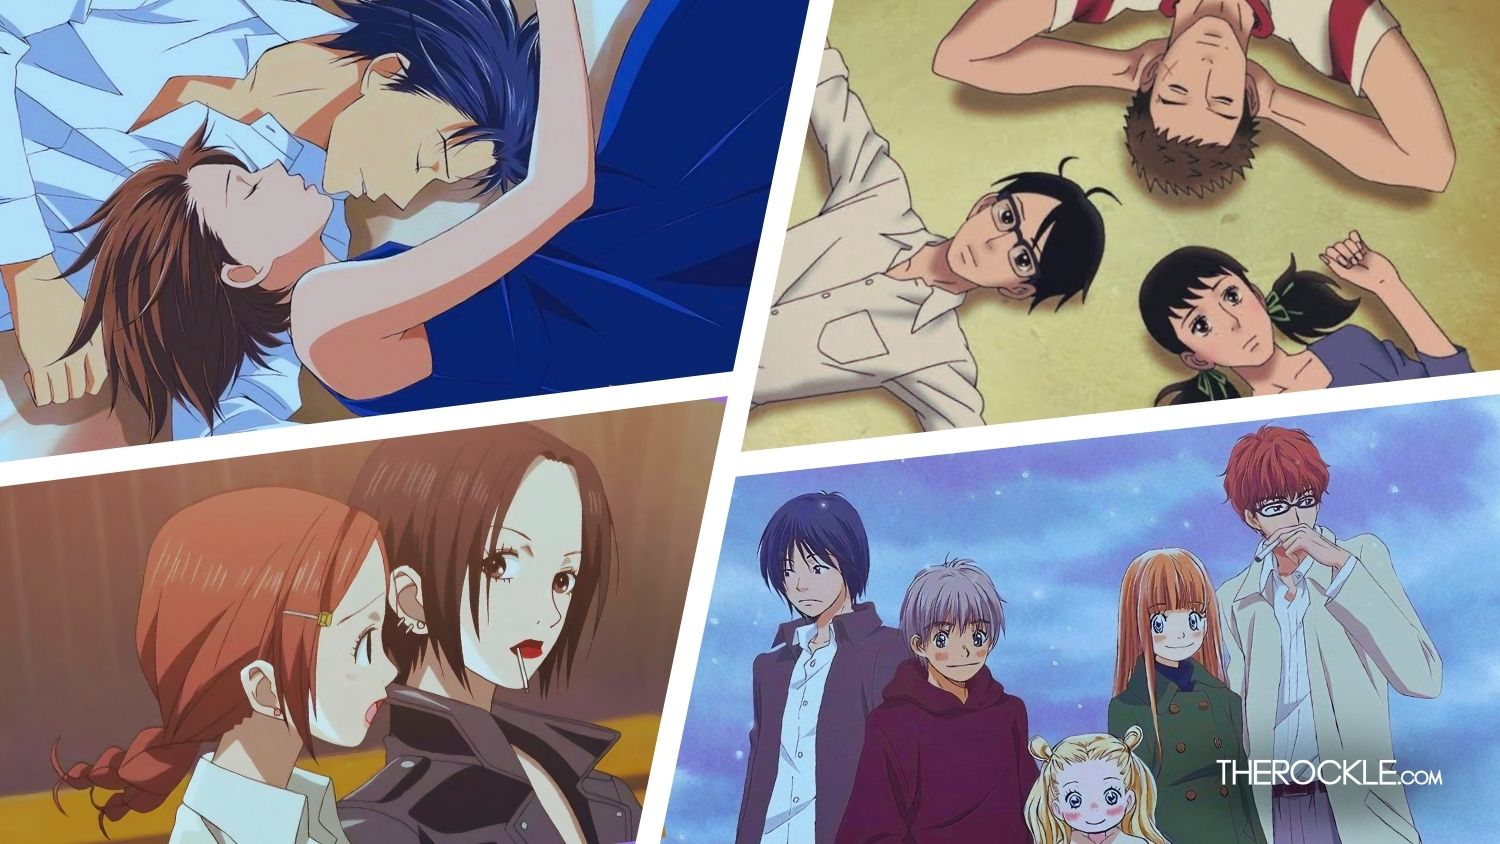 Collage of characters from Josei anime